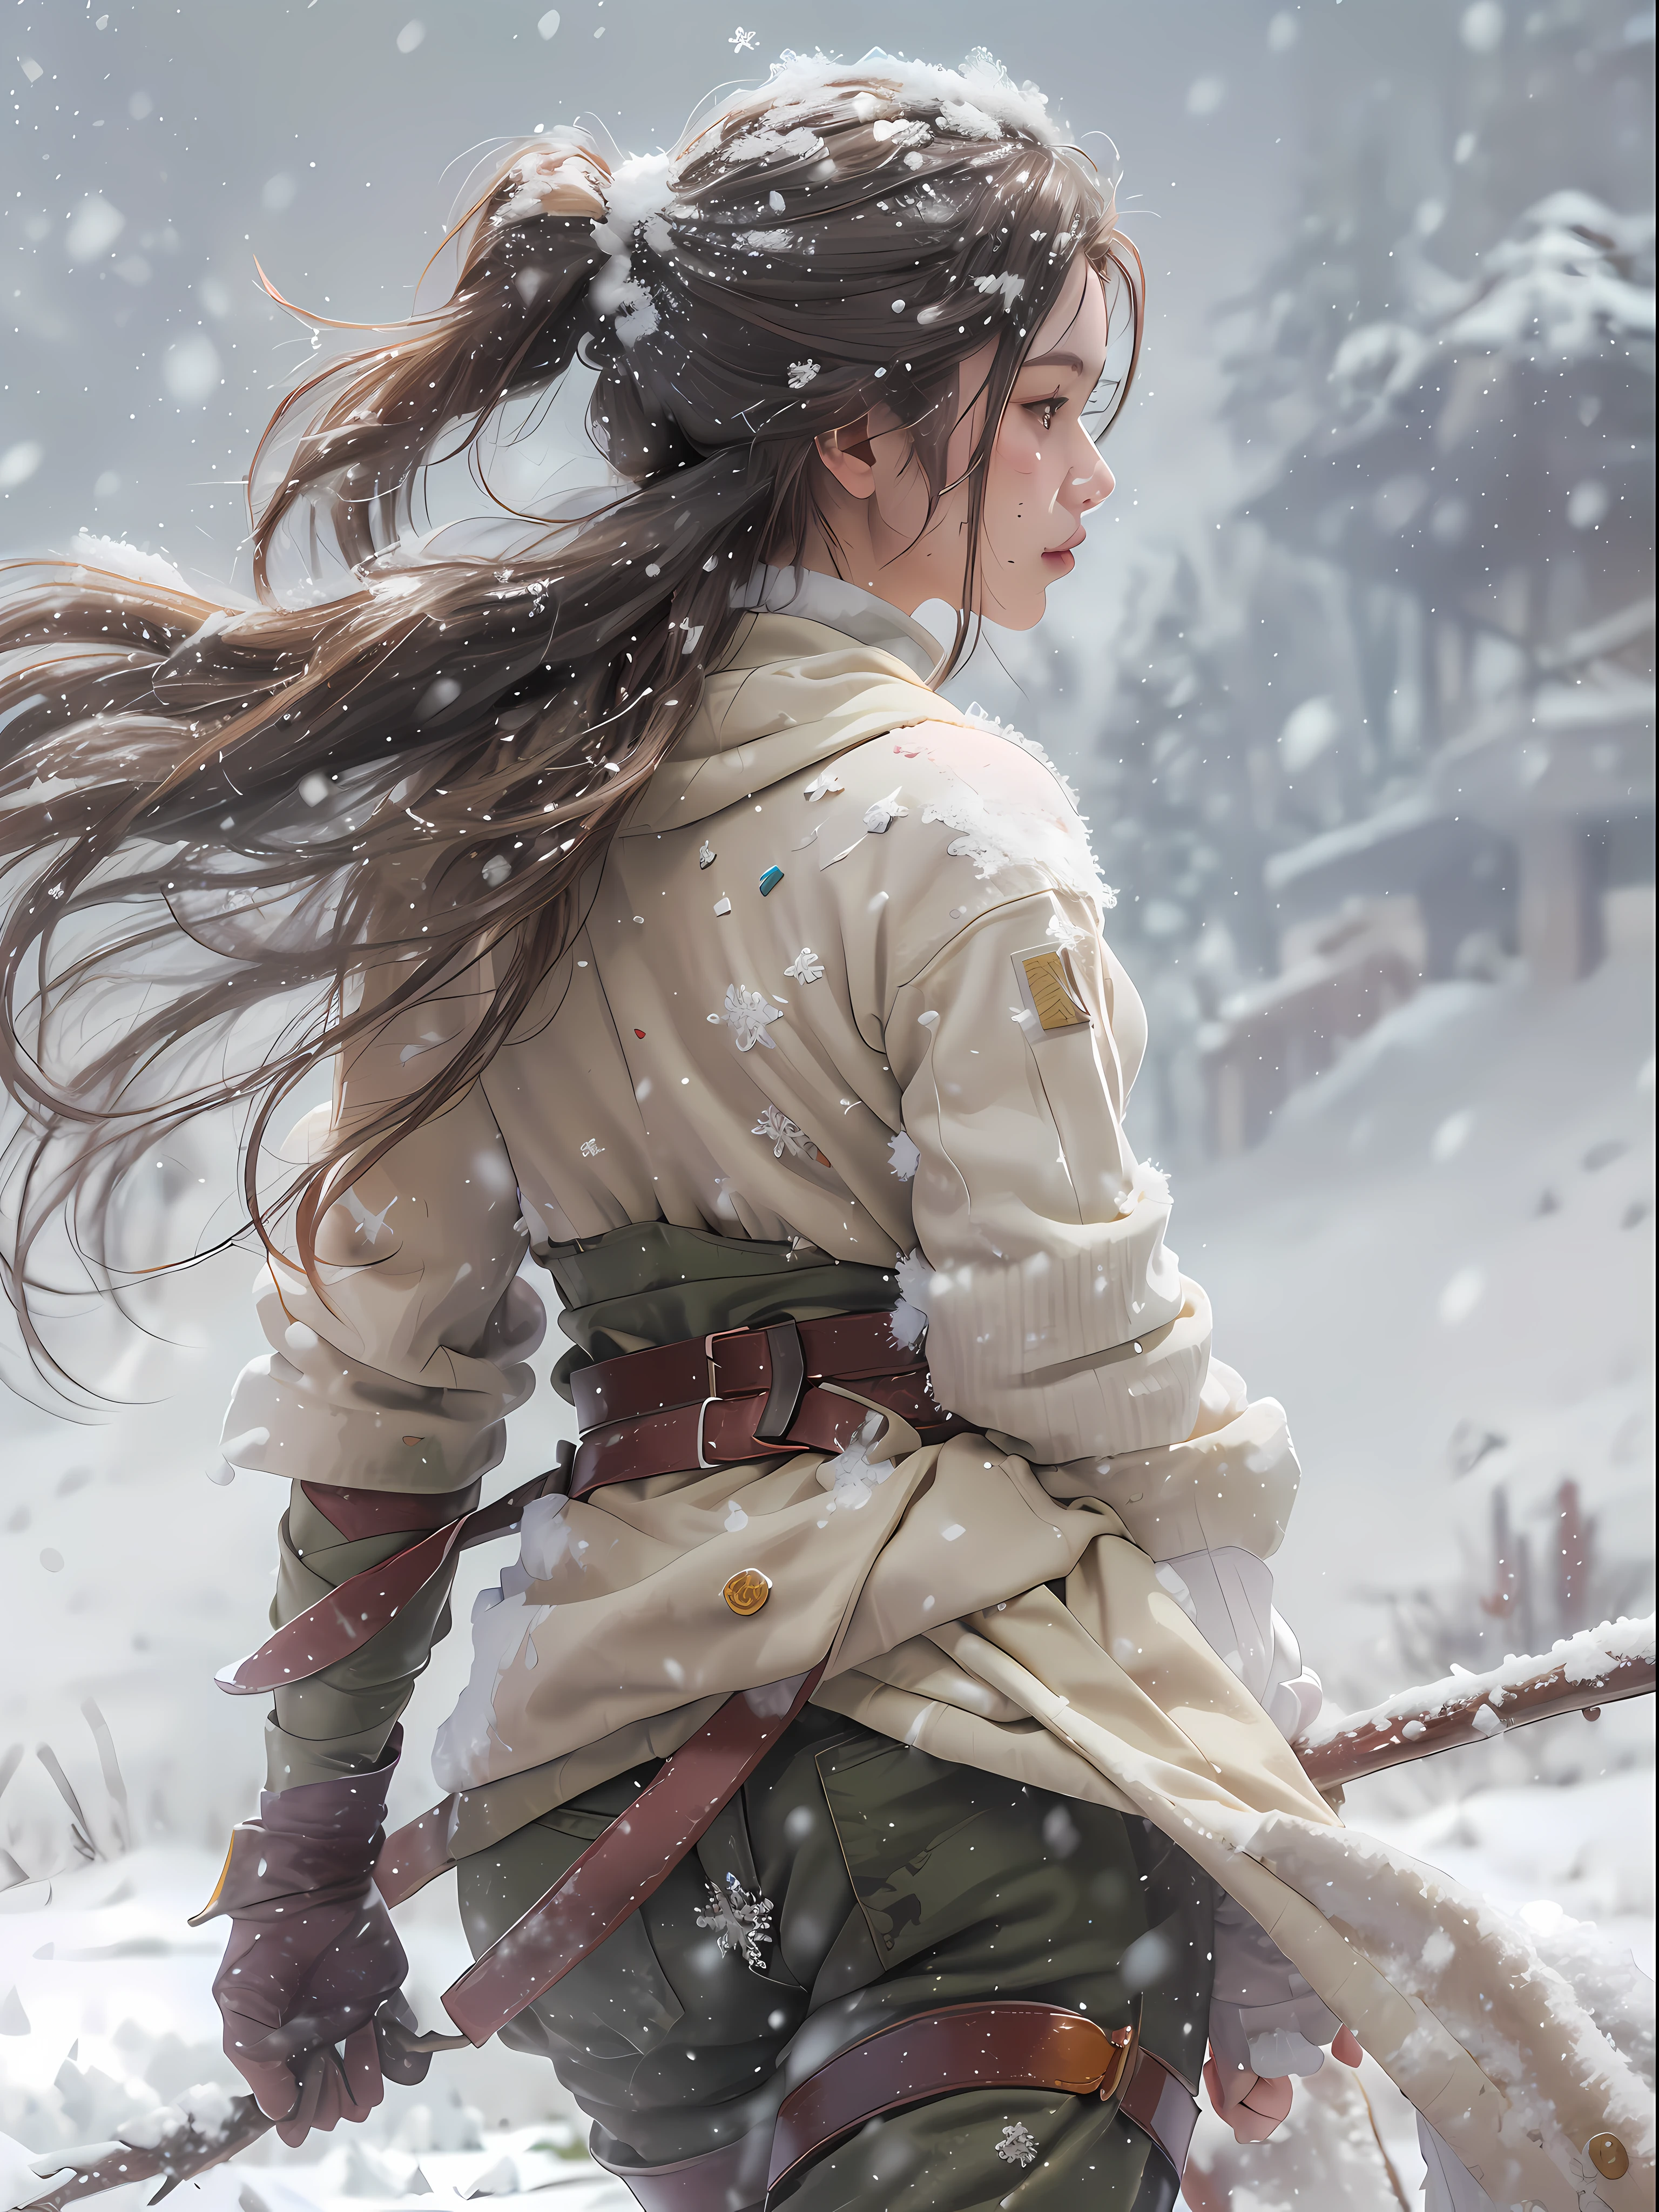 ((masterpiece, best quality)), photorealistic, realistic, fantasy art, stunning beautiful, intricate detail, extremely detail,
1girl, dynamic pose, back view, running on the snow, she is wearing a wooden long back in her back, (wooden long bow:1.3)
((with pony tail brown hairs, medium breast, slender body shape, beautiful and aesthetic, [[abs]]))
(she is wearing white tank top, beige khaki army pant,black leather belt, torn and dirty clothes),
she is injured,
(bandaged arm, bandage on her left arm, bleeding, 
blood on clothes)
(snowing, blizzard, snow background:1.5)